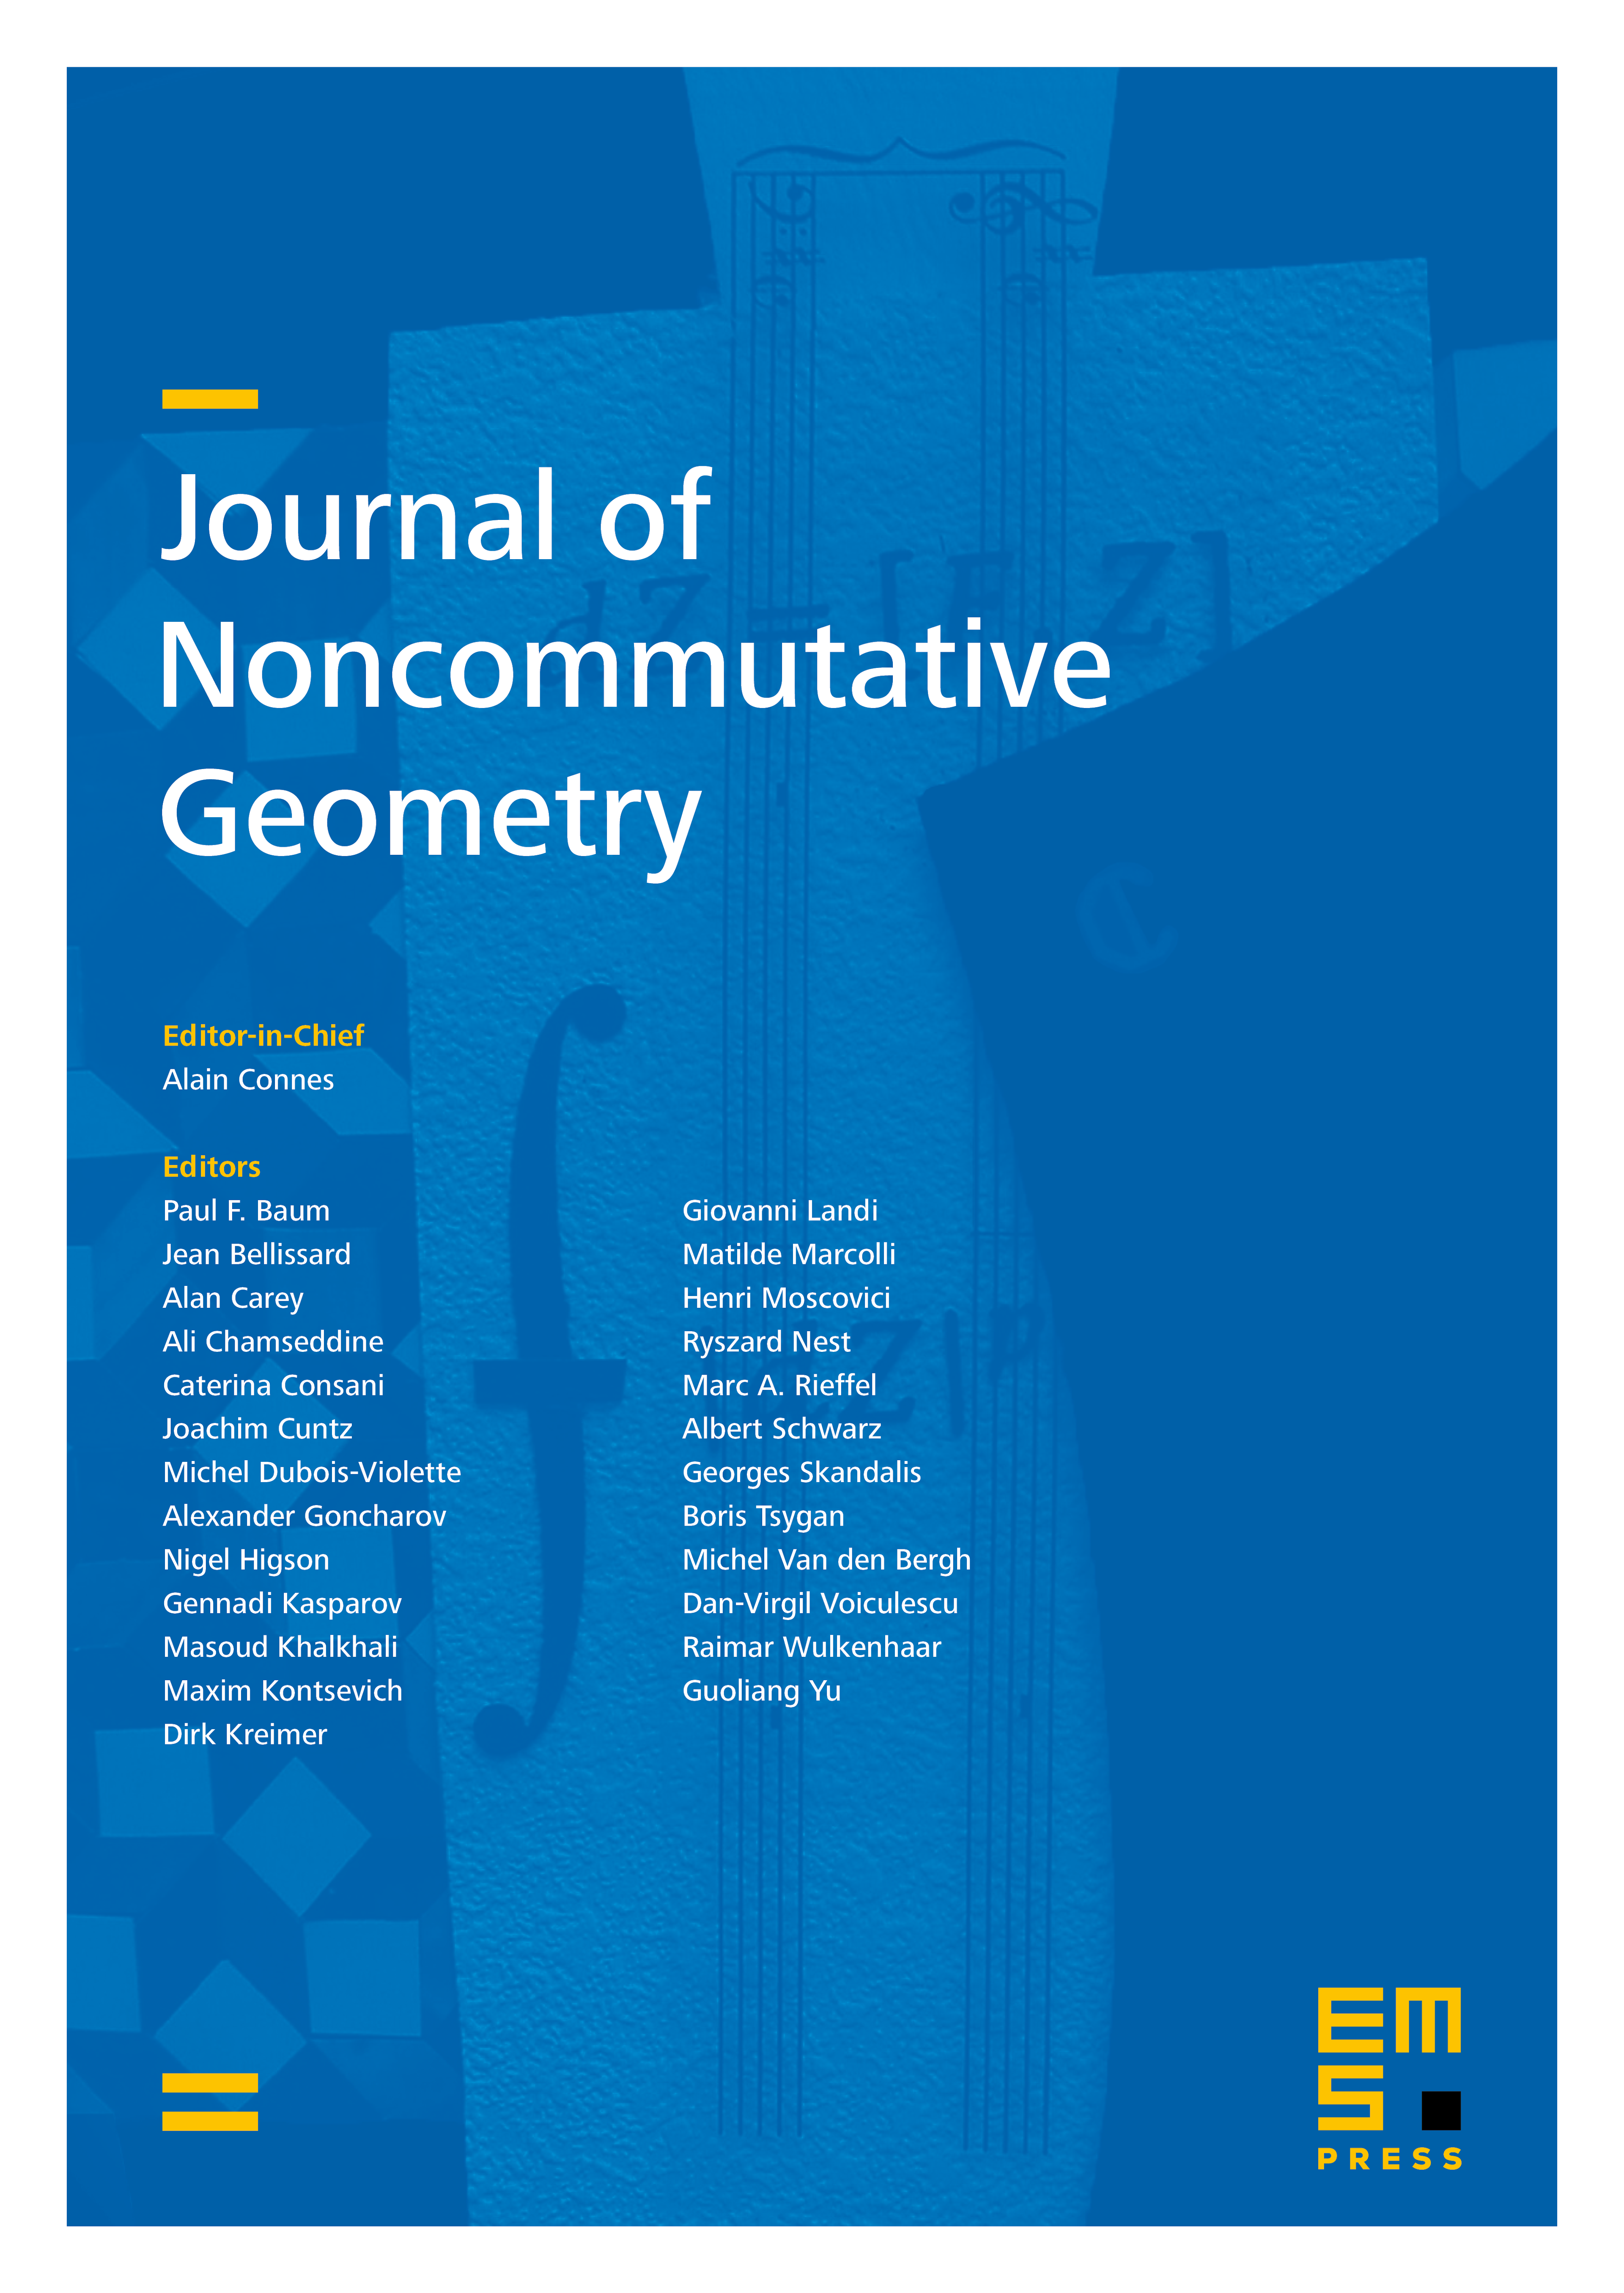 Divided differences in noncommutative geometry: Rearrangement Lemma, functional calculus and expansional formula cover